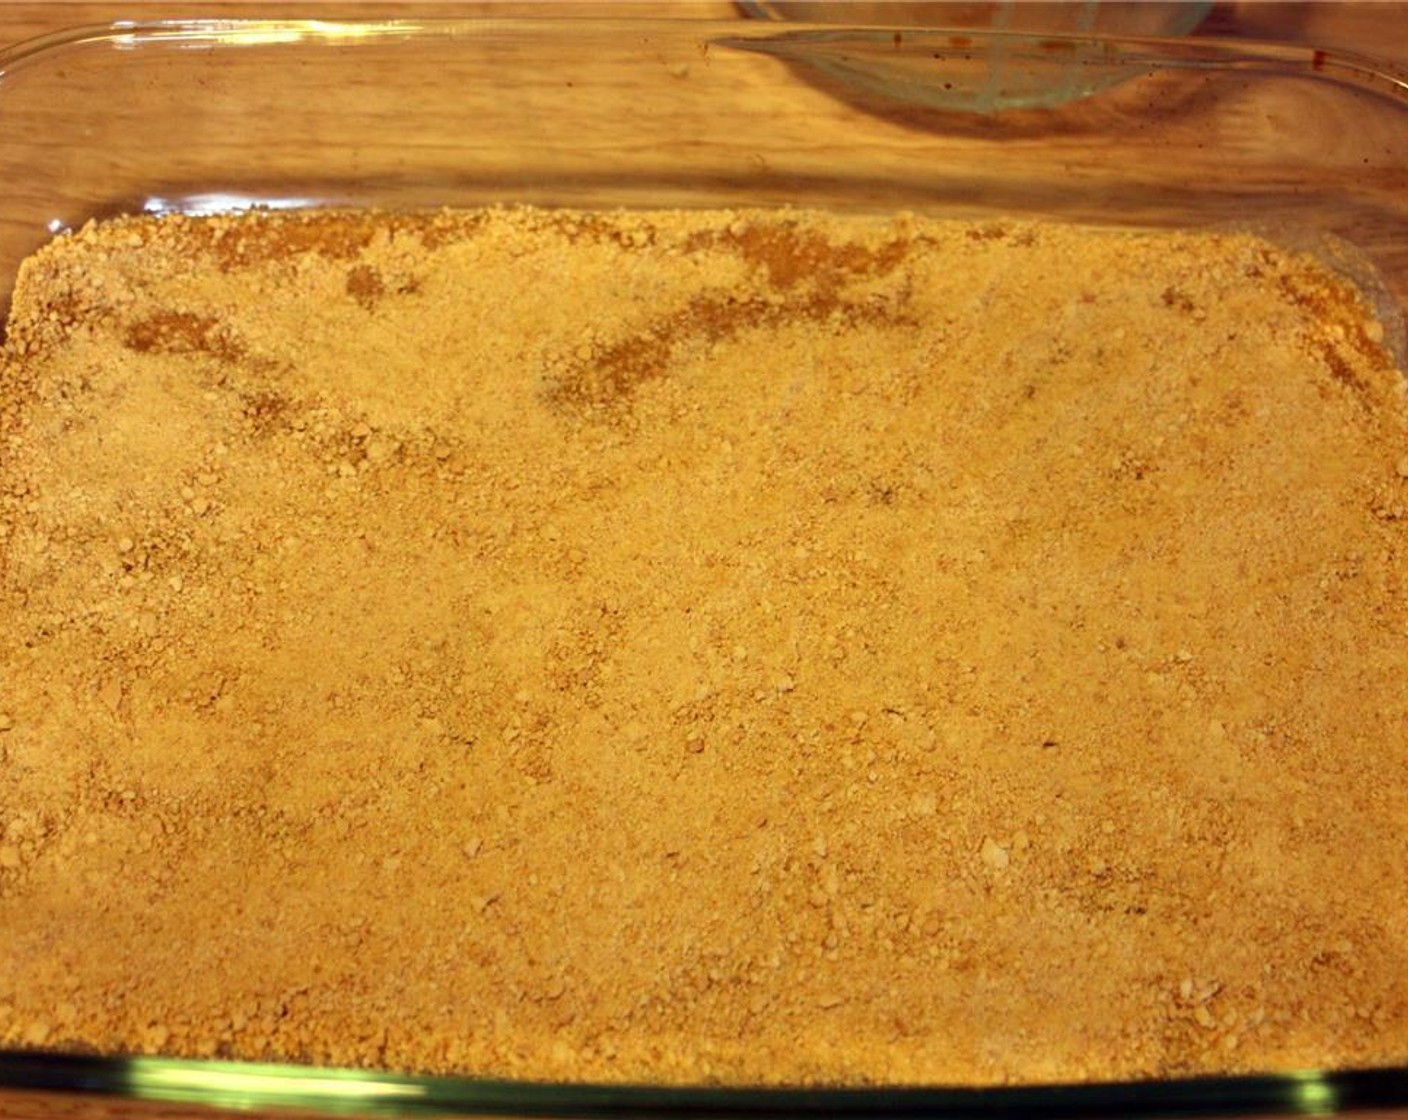 step 4 Sprinkle the Graham Cracker Crumbs (1 1/2 cups) on to the melted butter so that it is completely covered. Make sure you distribute the crumbs evenly. Once covered, pat the crumbs down a bit to make sure they stick together well.